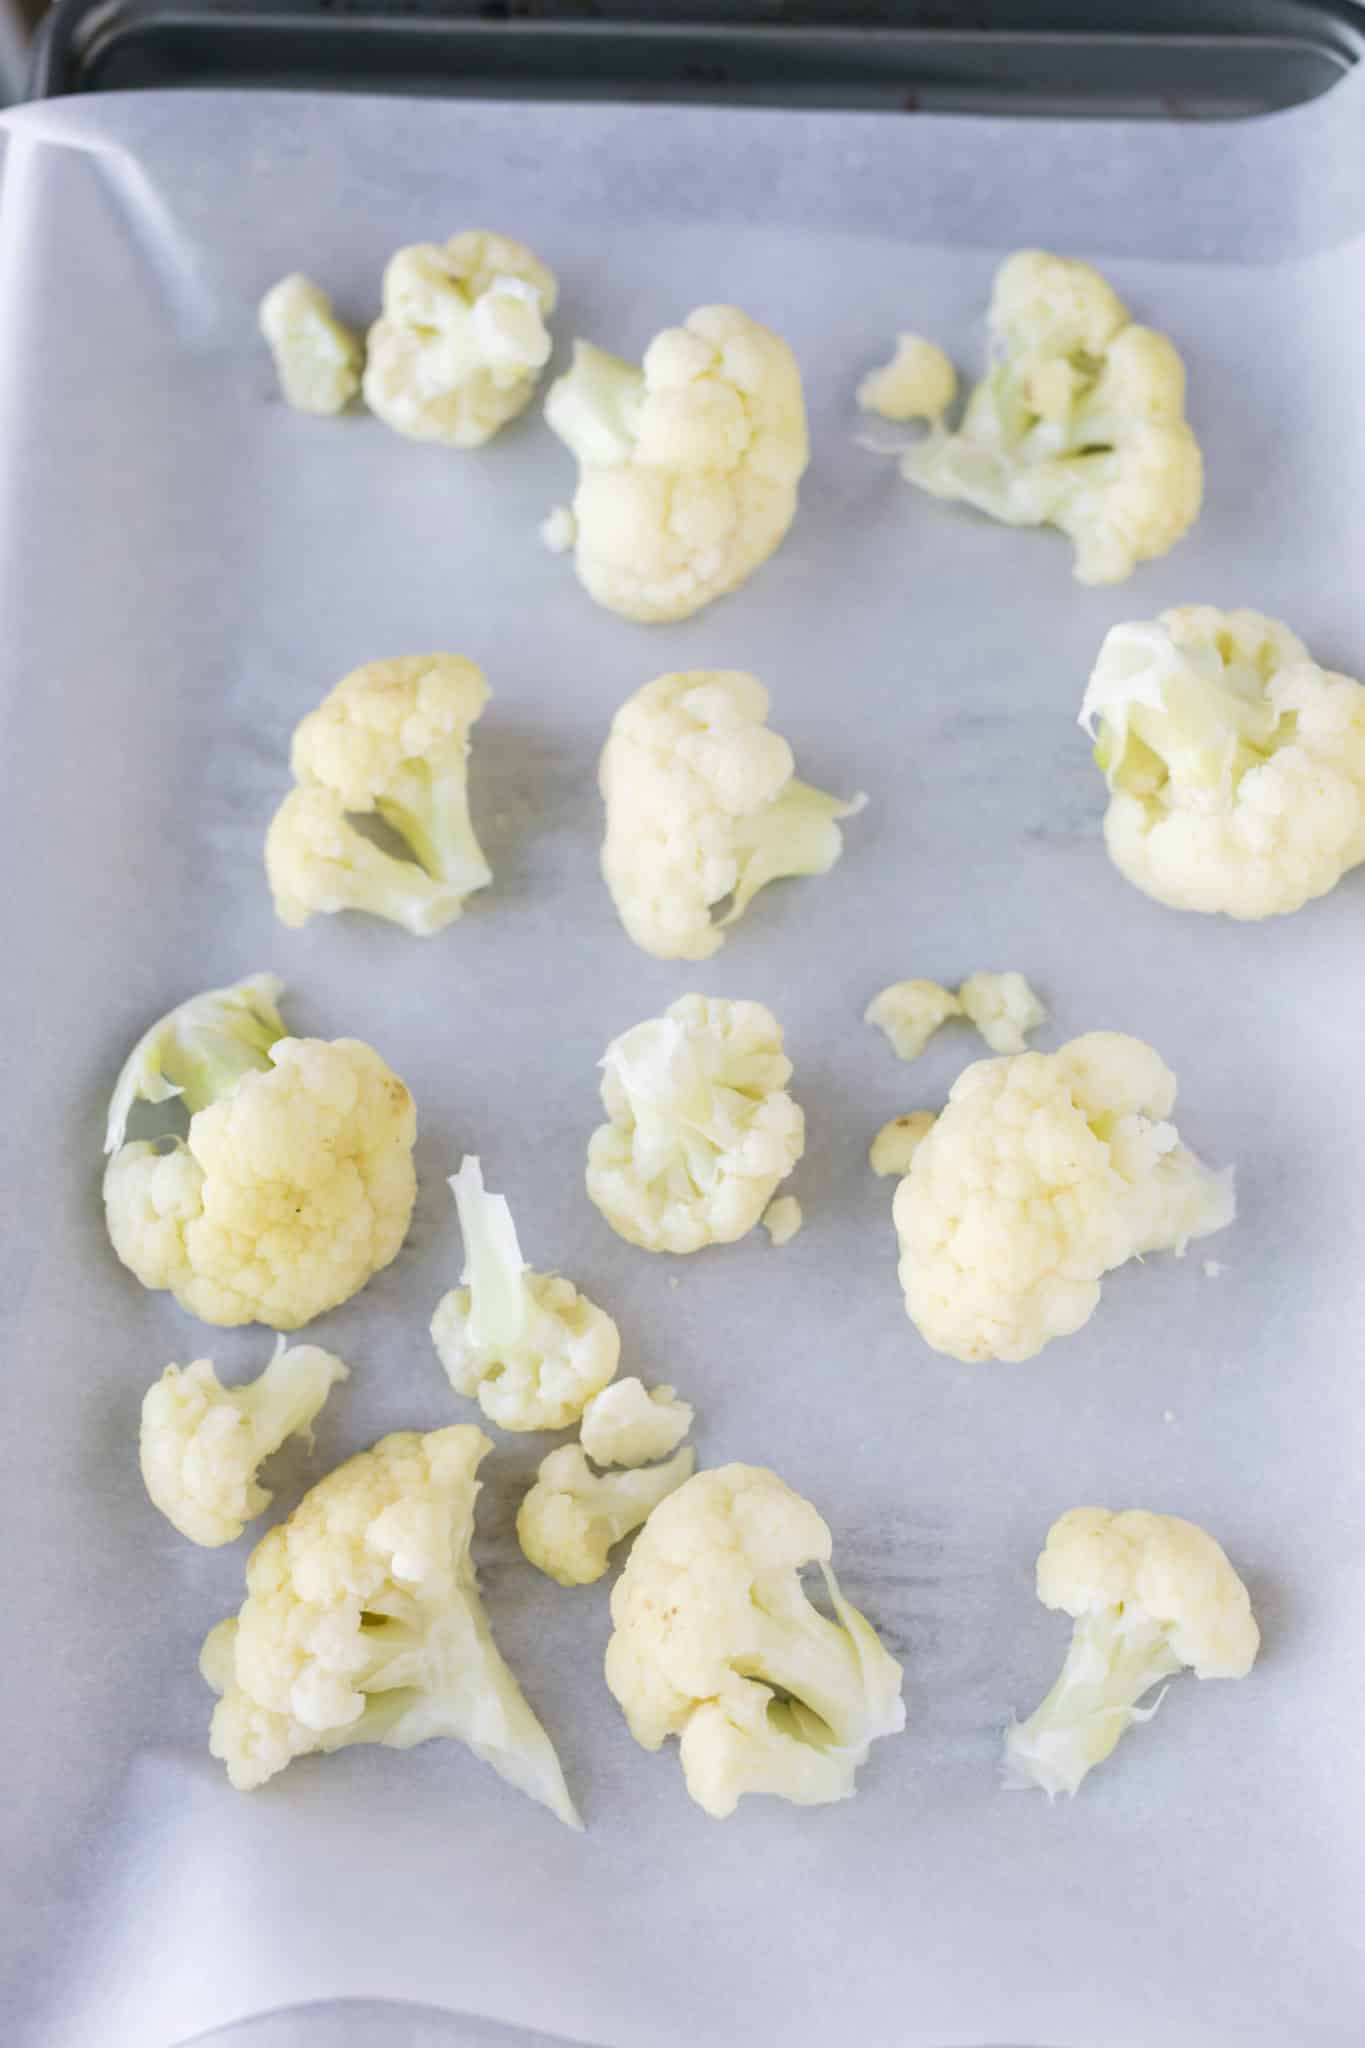 cauliflower on a baking sheet with parchment paper.